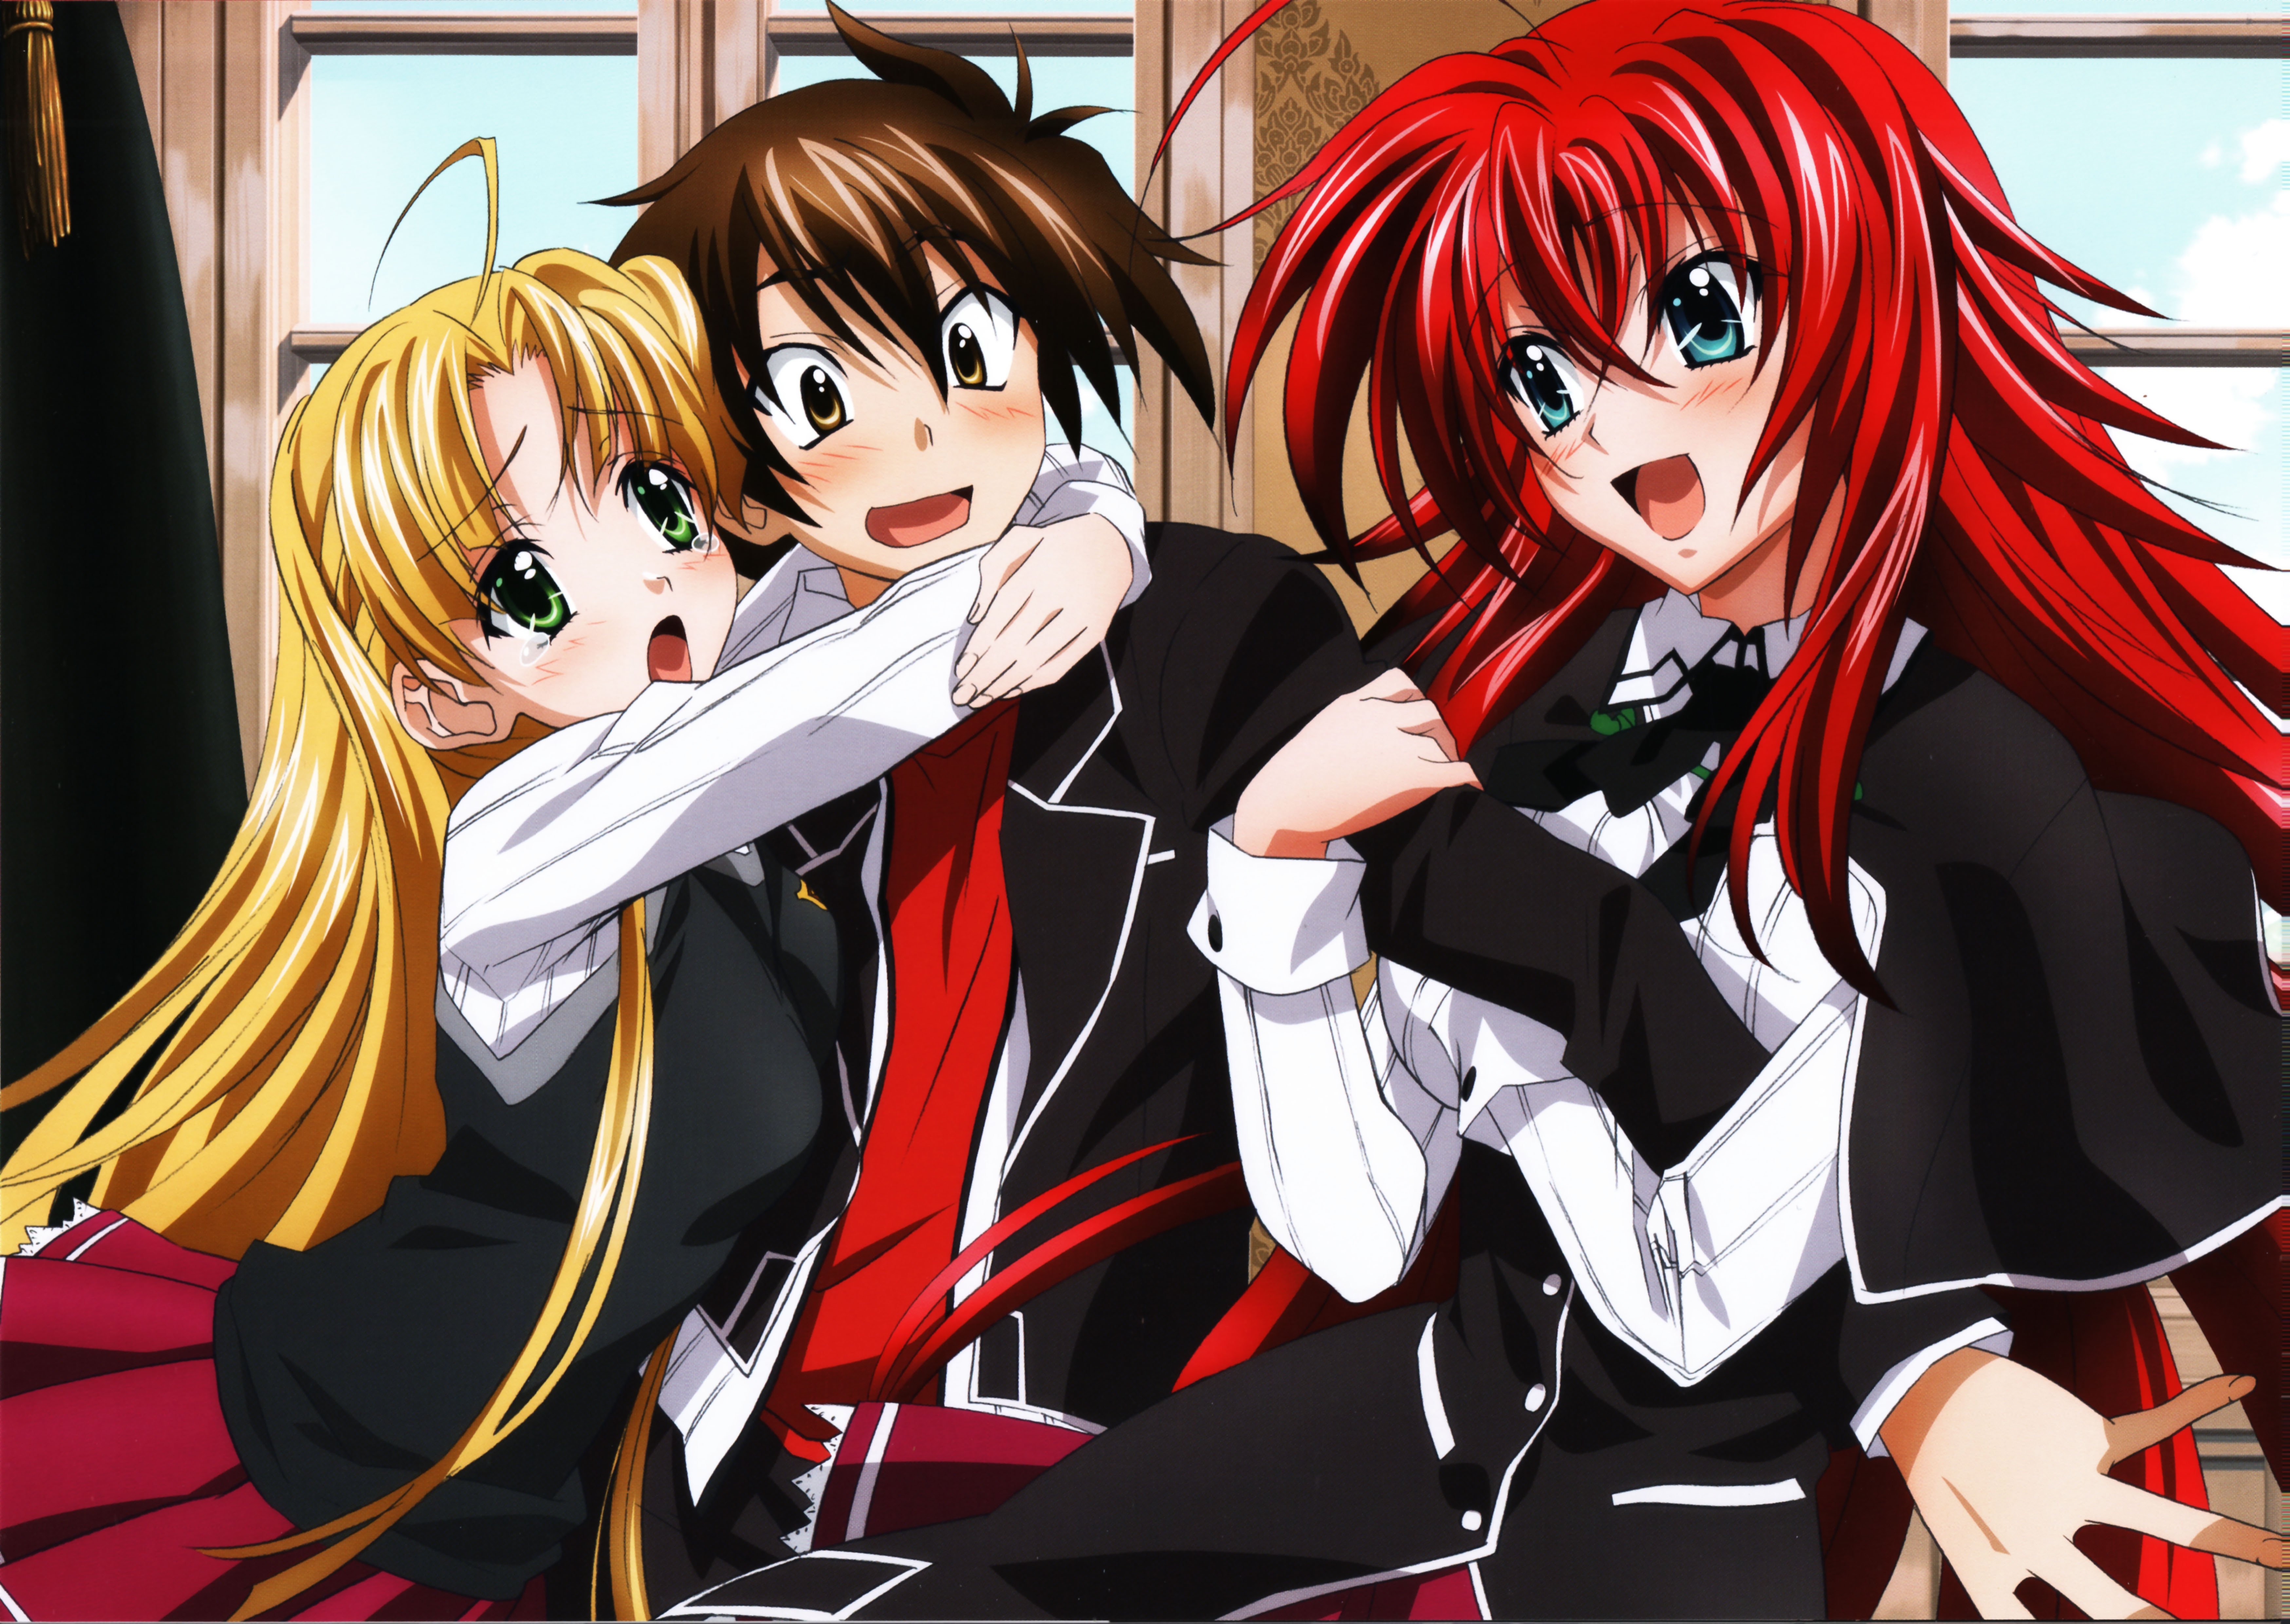 7. "Rias Gremory" from High School DxD - wide 7